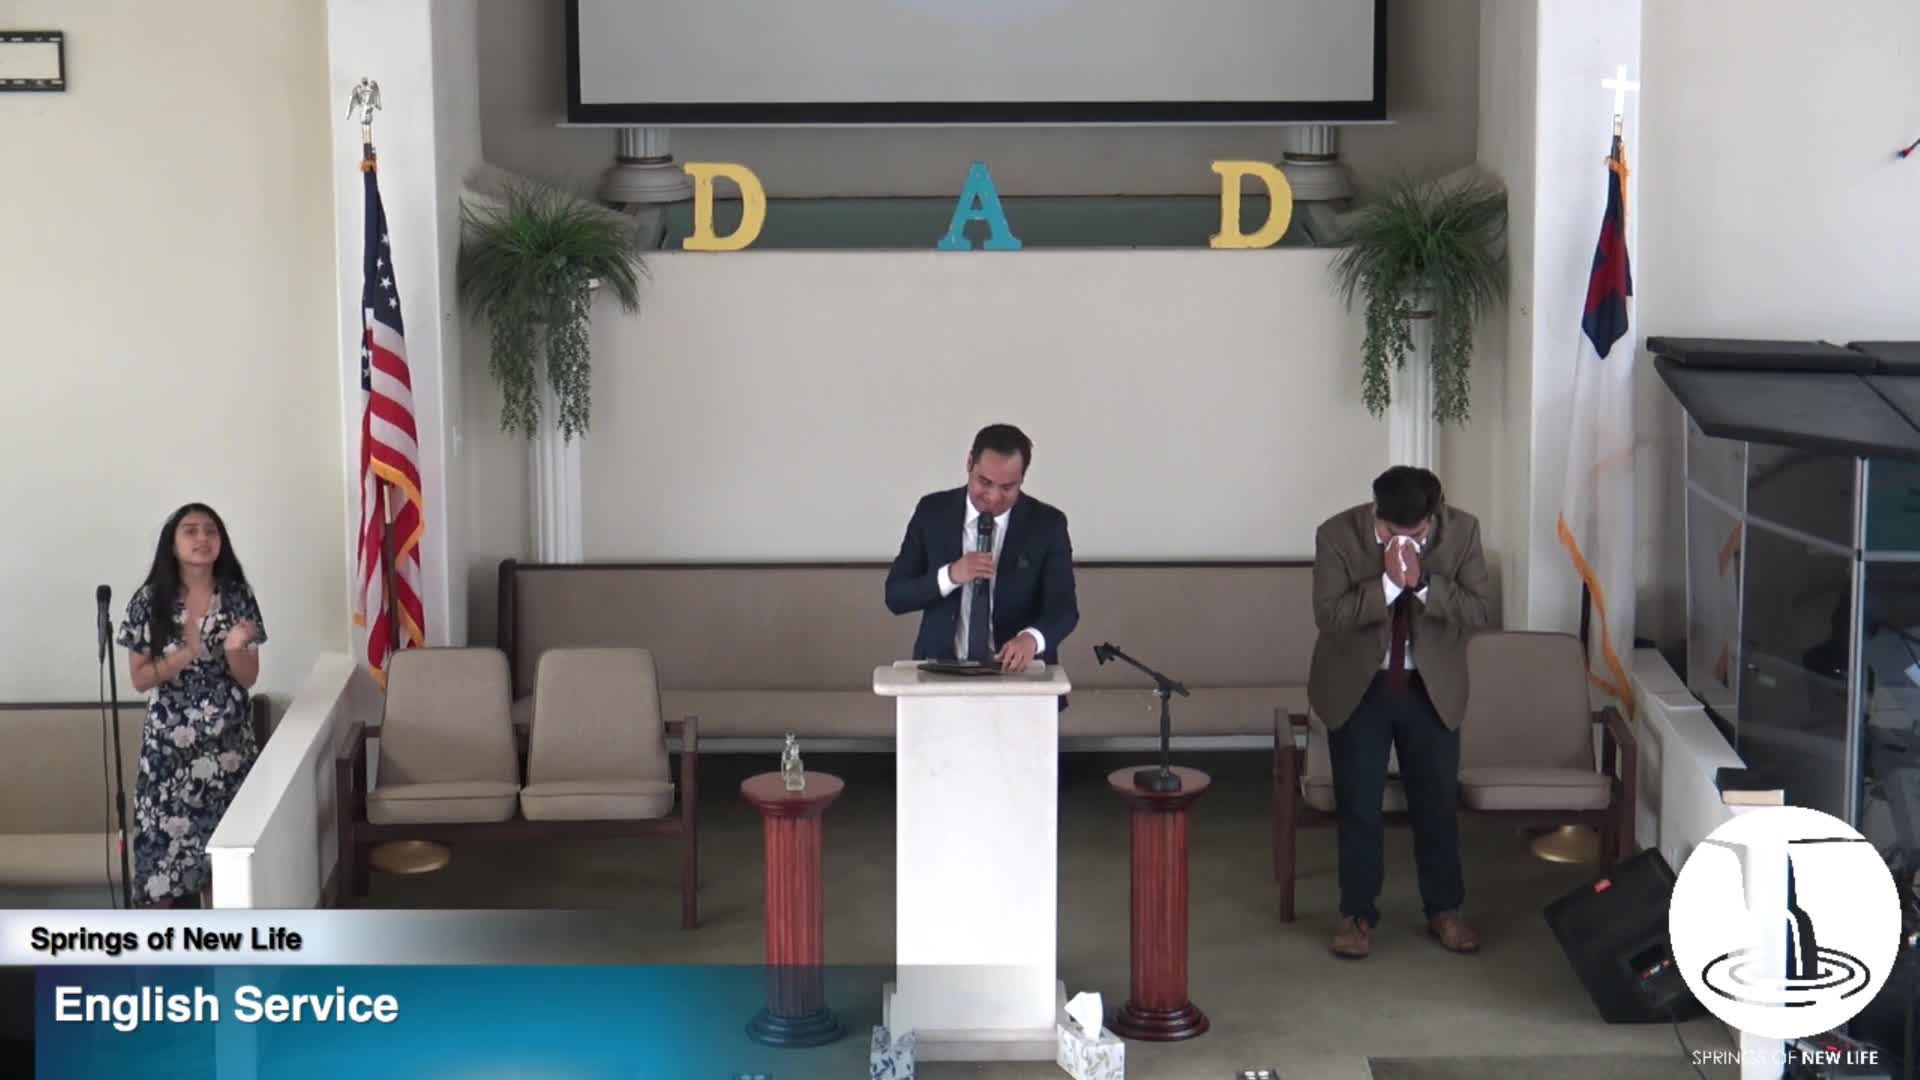 Fathers Day Preaching